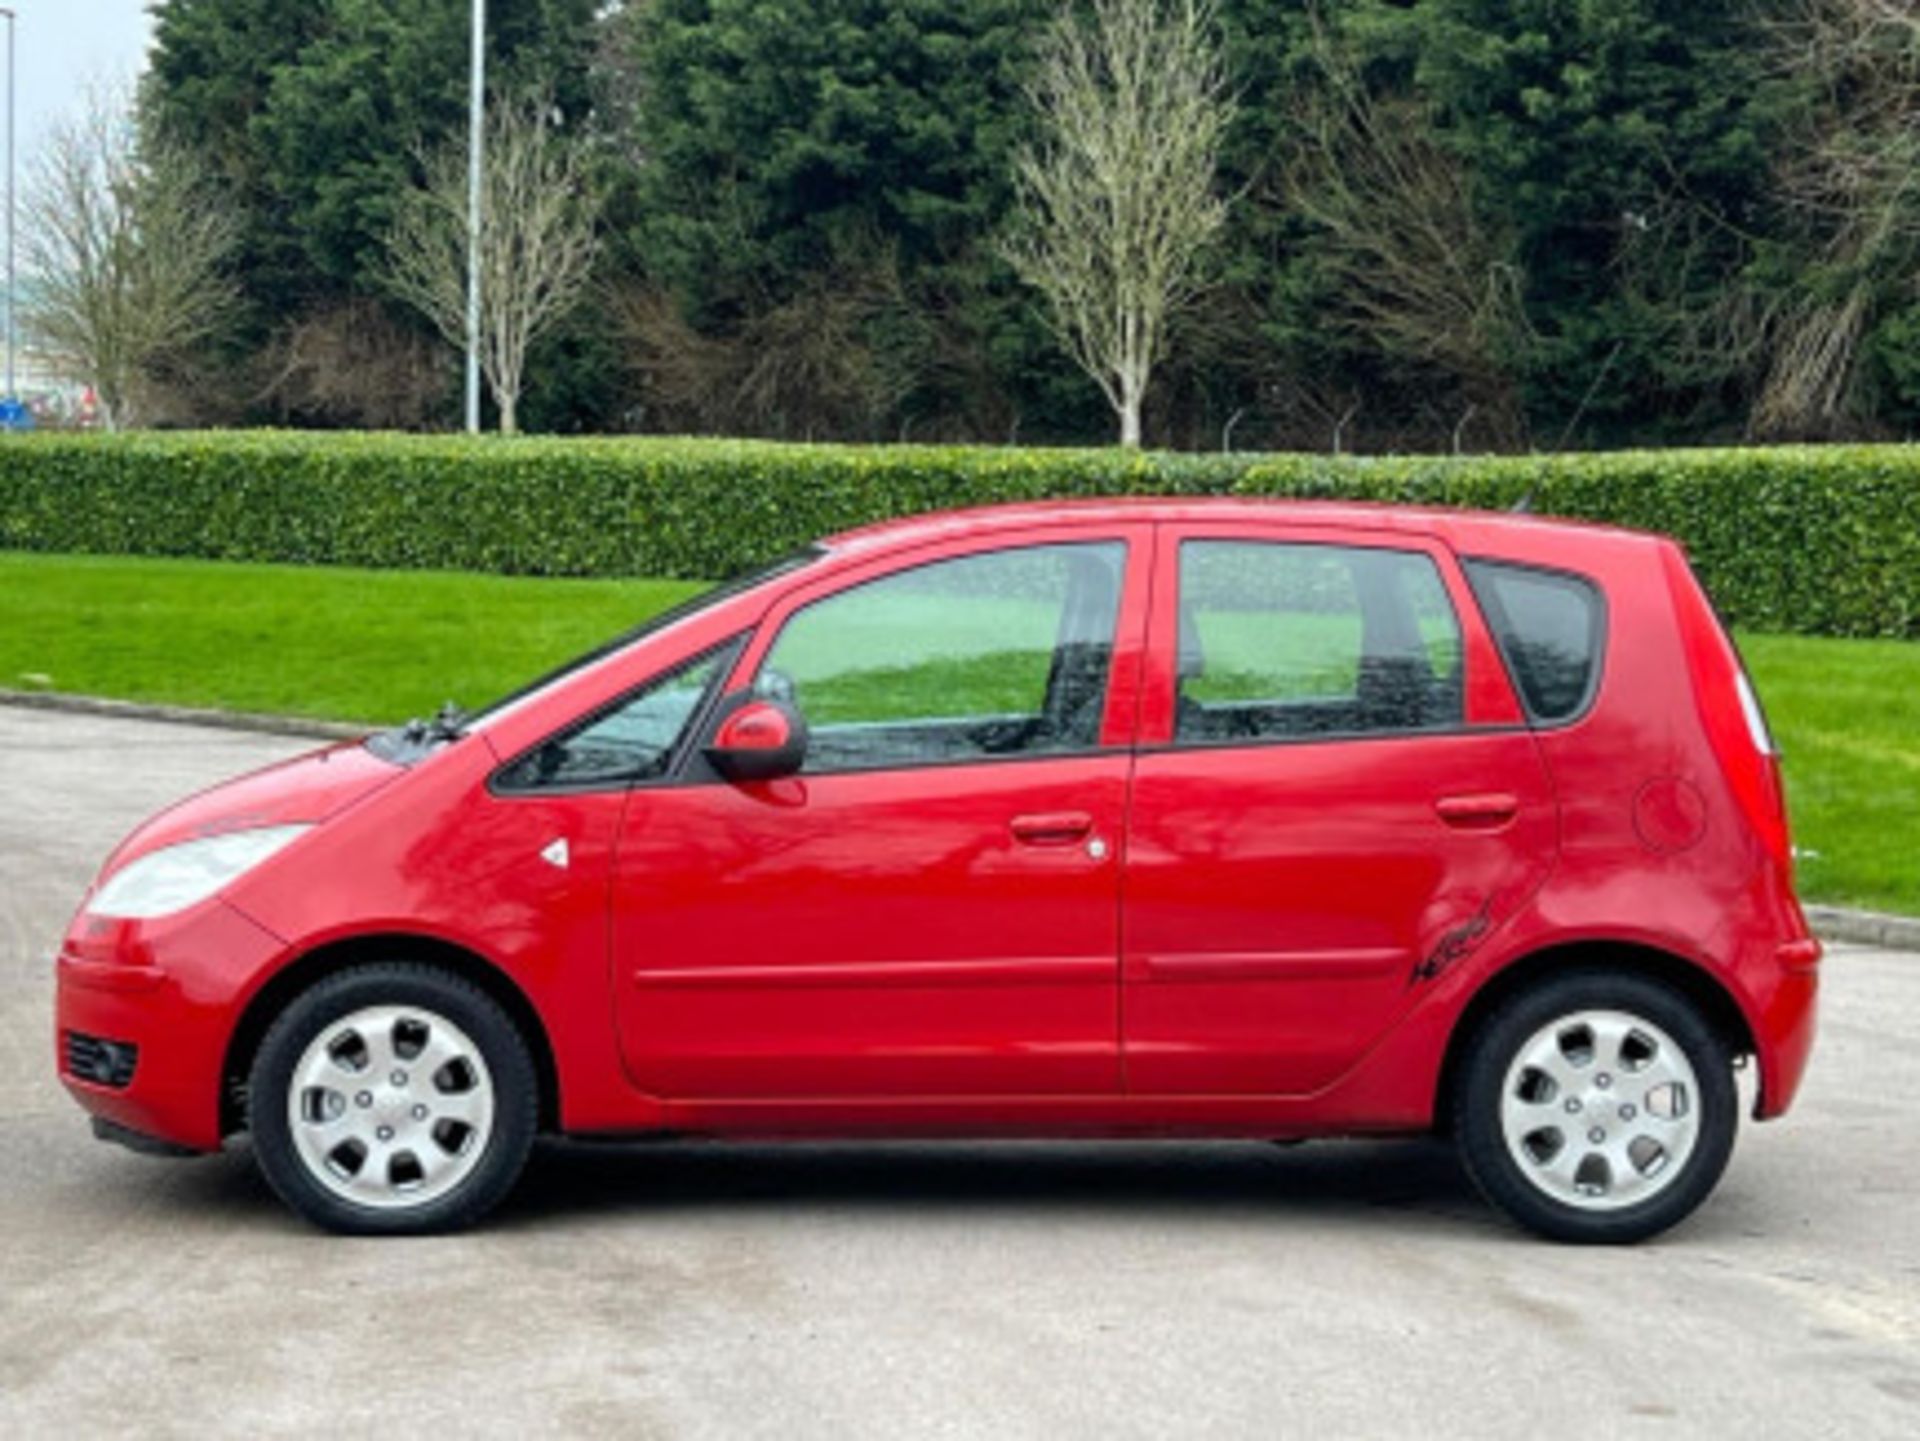 2007 MITSUBISHI COLT 1.5 DI-D DIESEL AUTOMATIC >>--NO VAT ON HAMMER--<< - Image 2 of 191